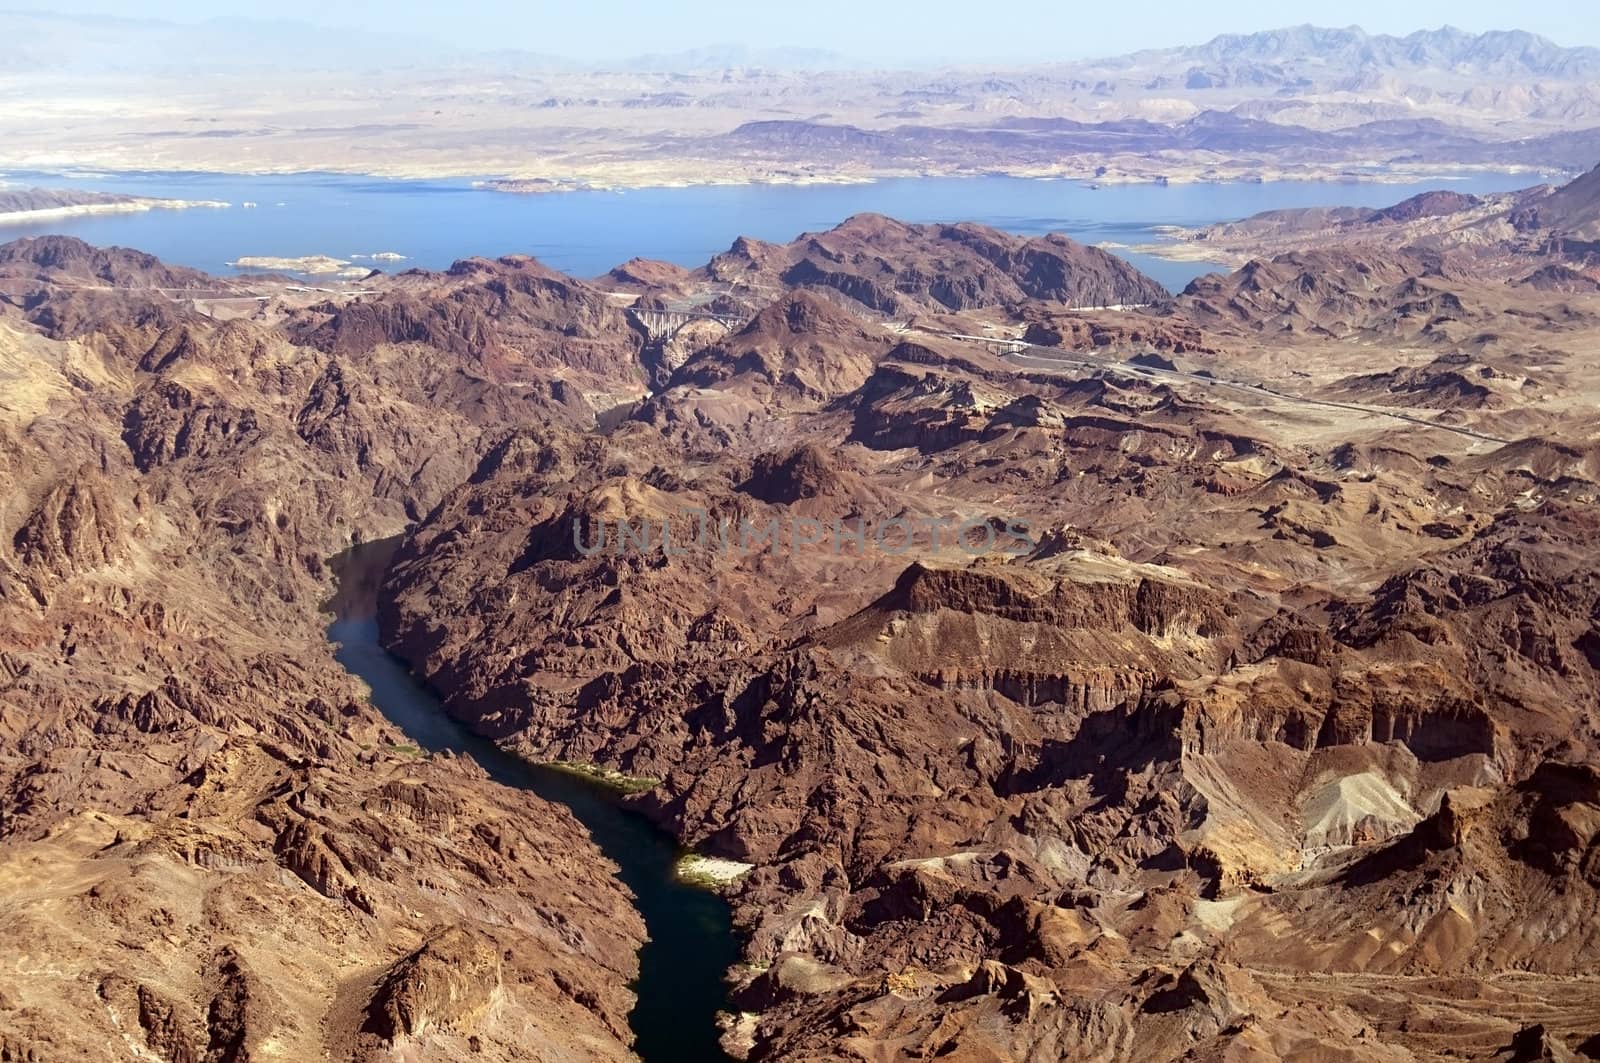 Aerial view of the Colorado River and lake Mead by irisphoto4